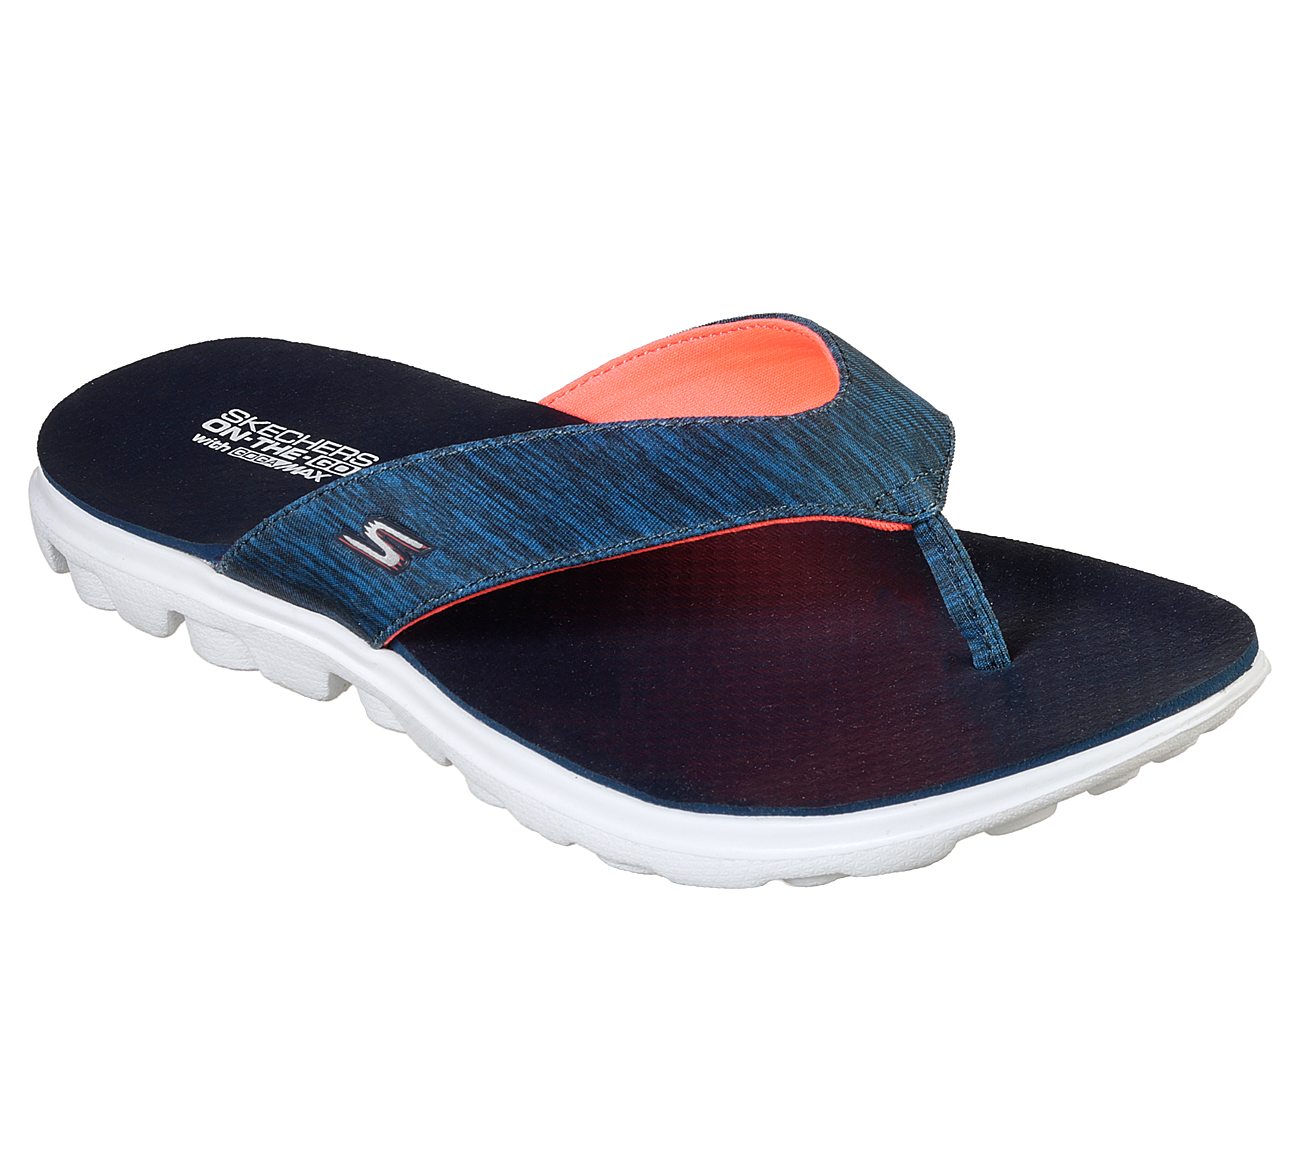 ON-THE-GO - MAUI, NAVY/ORANGE Footwear Lateral View